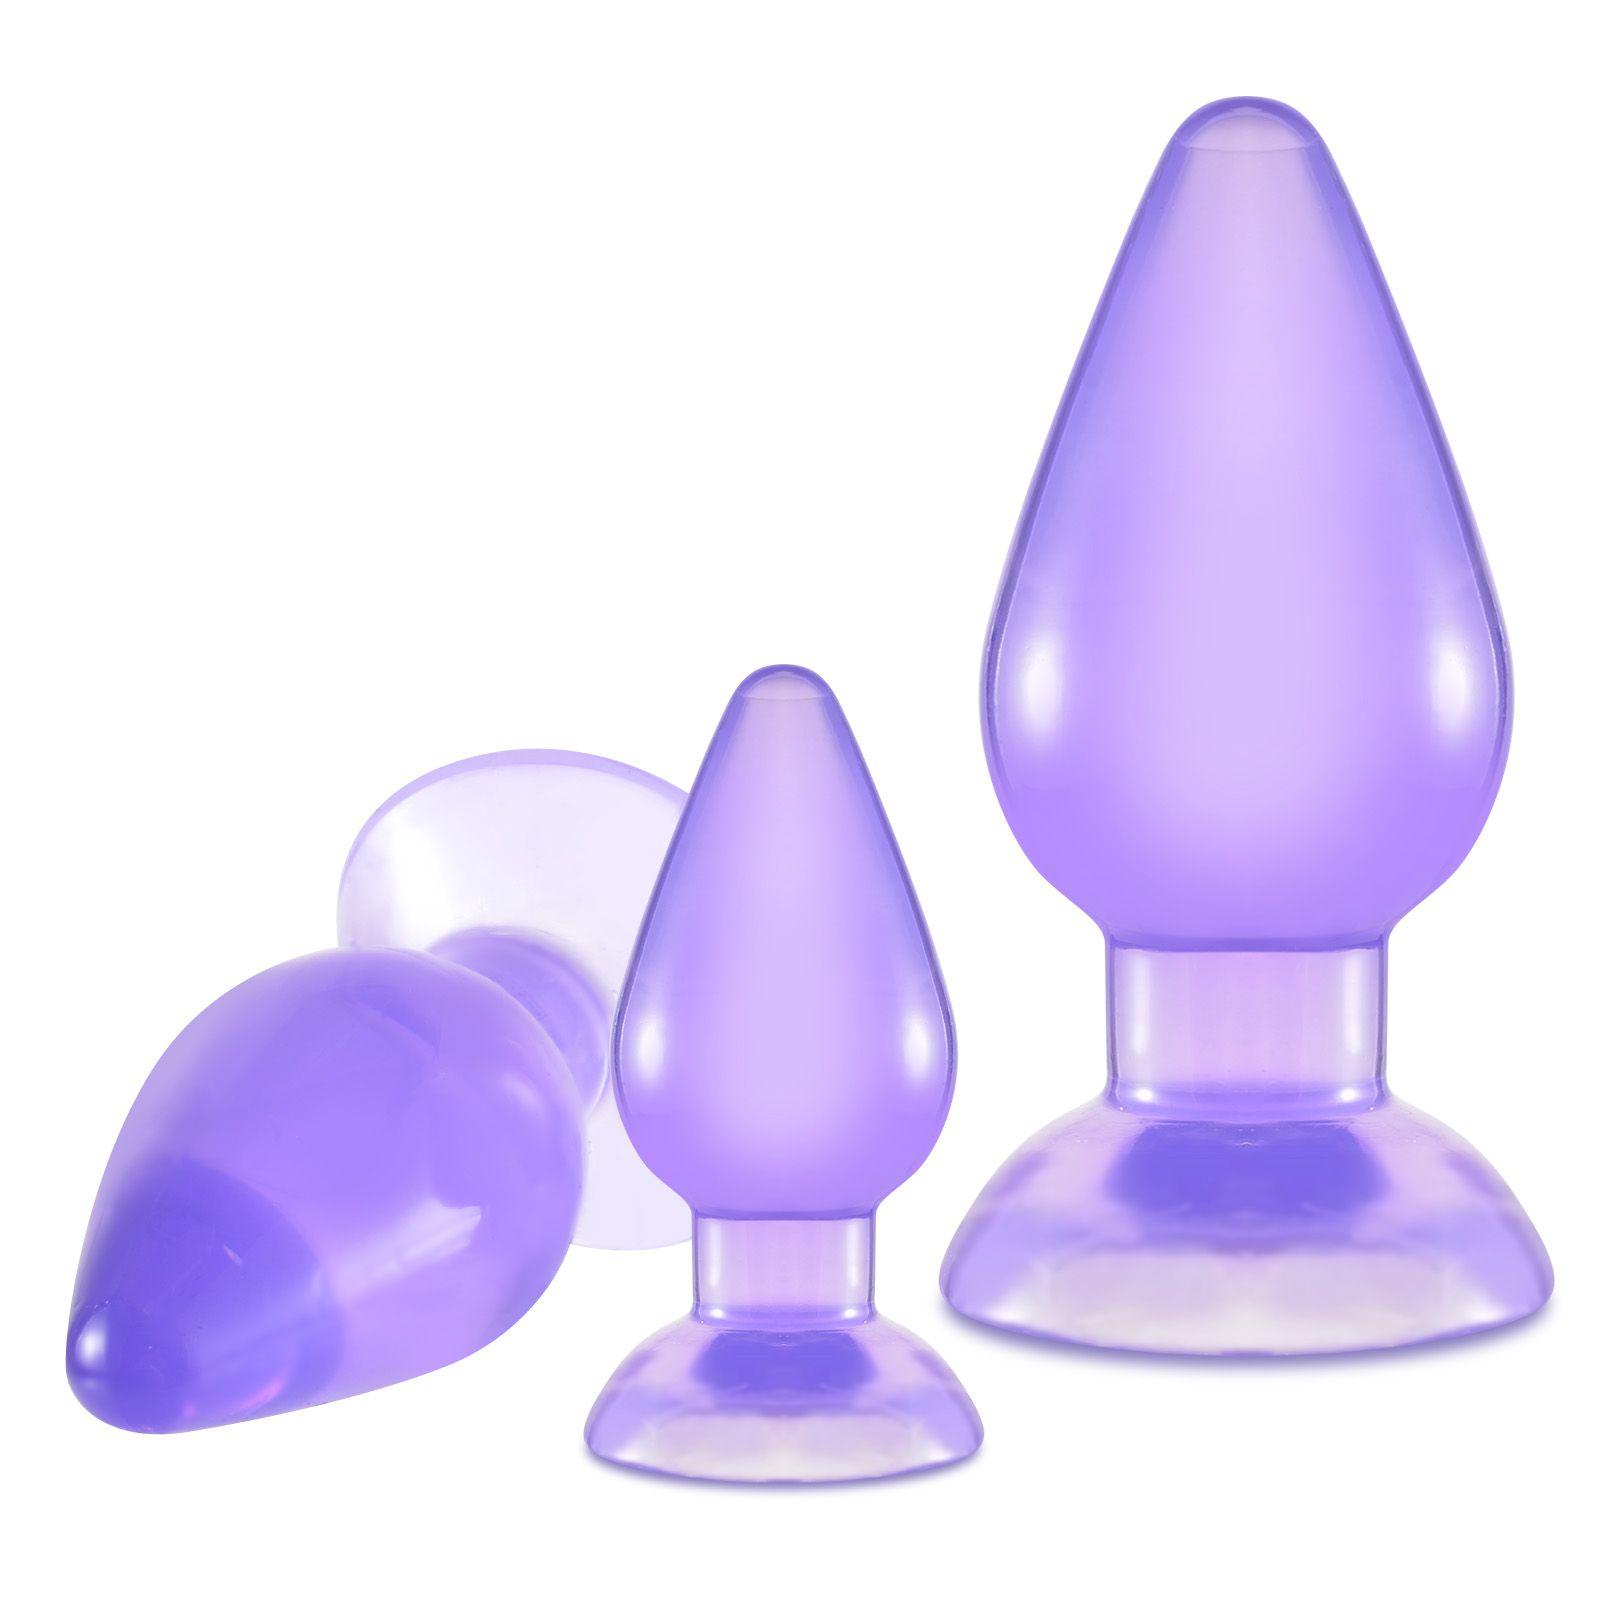 Super Huge Dia 4.5-7.2cm Thick T Shape Xxl Anal Plug Set Butt Plugs Trainer Anus Intercourse Sexy Toy For Men Women And Couple